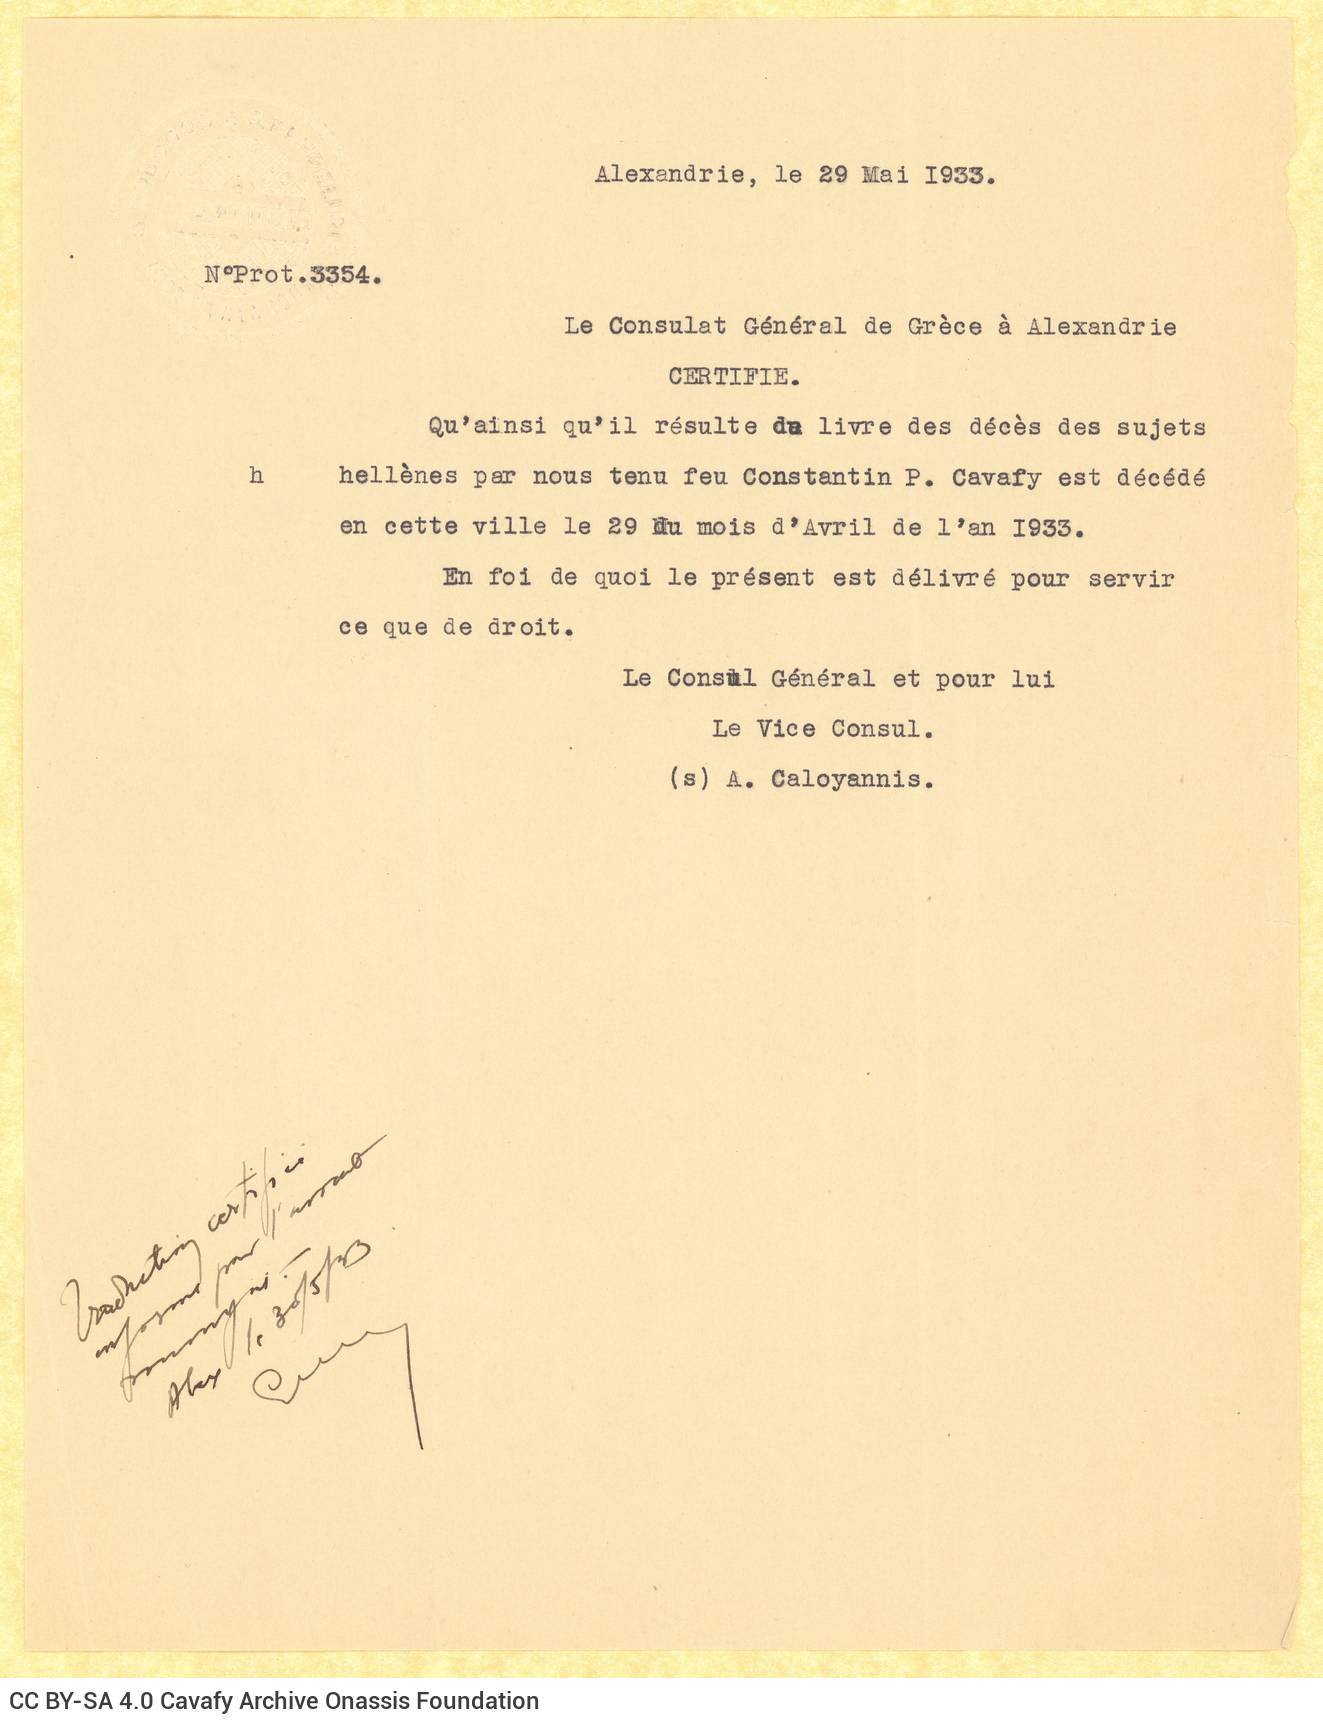 Typewritten copy of decision No. 126 of the Greek Consular Court of Alexandria, by virtue of which Cavafy's will is probated,